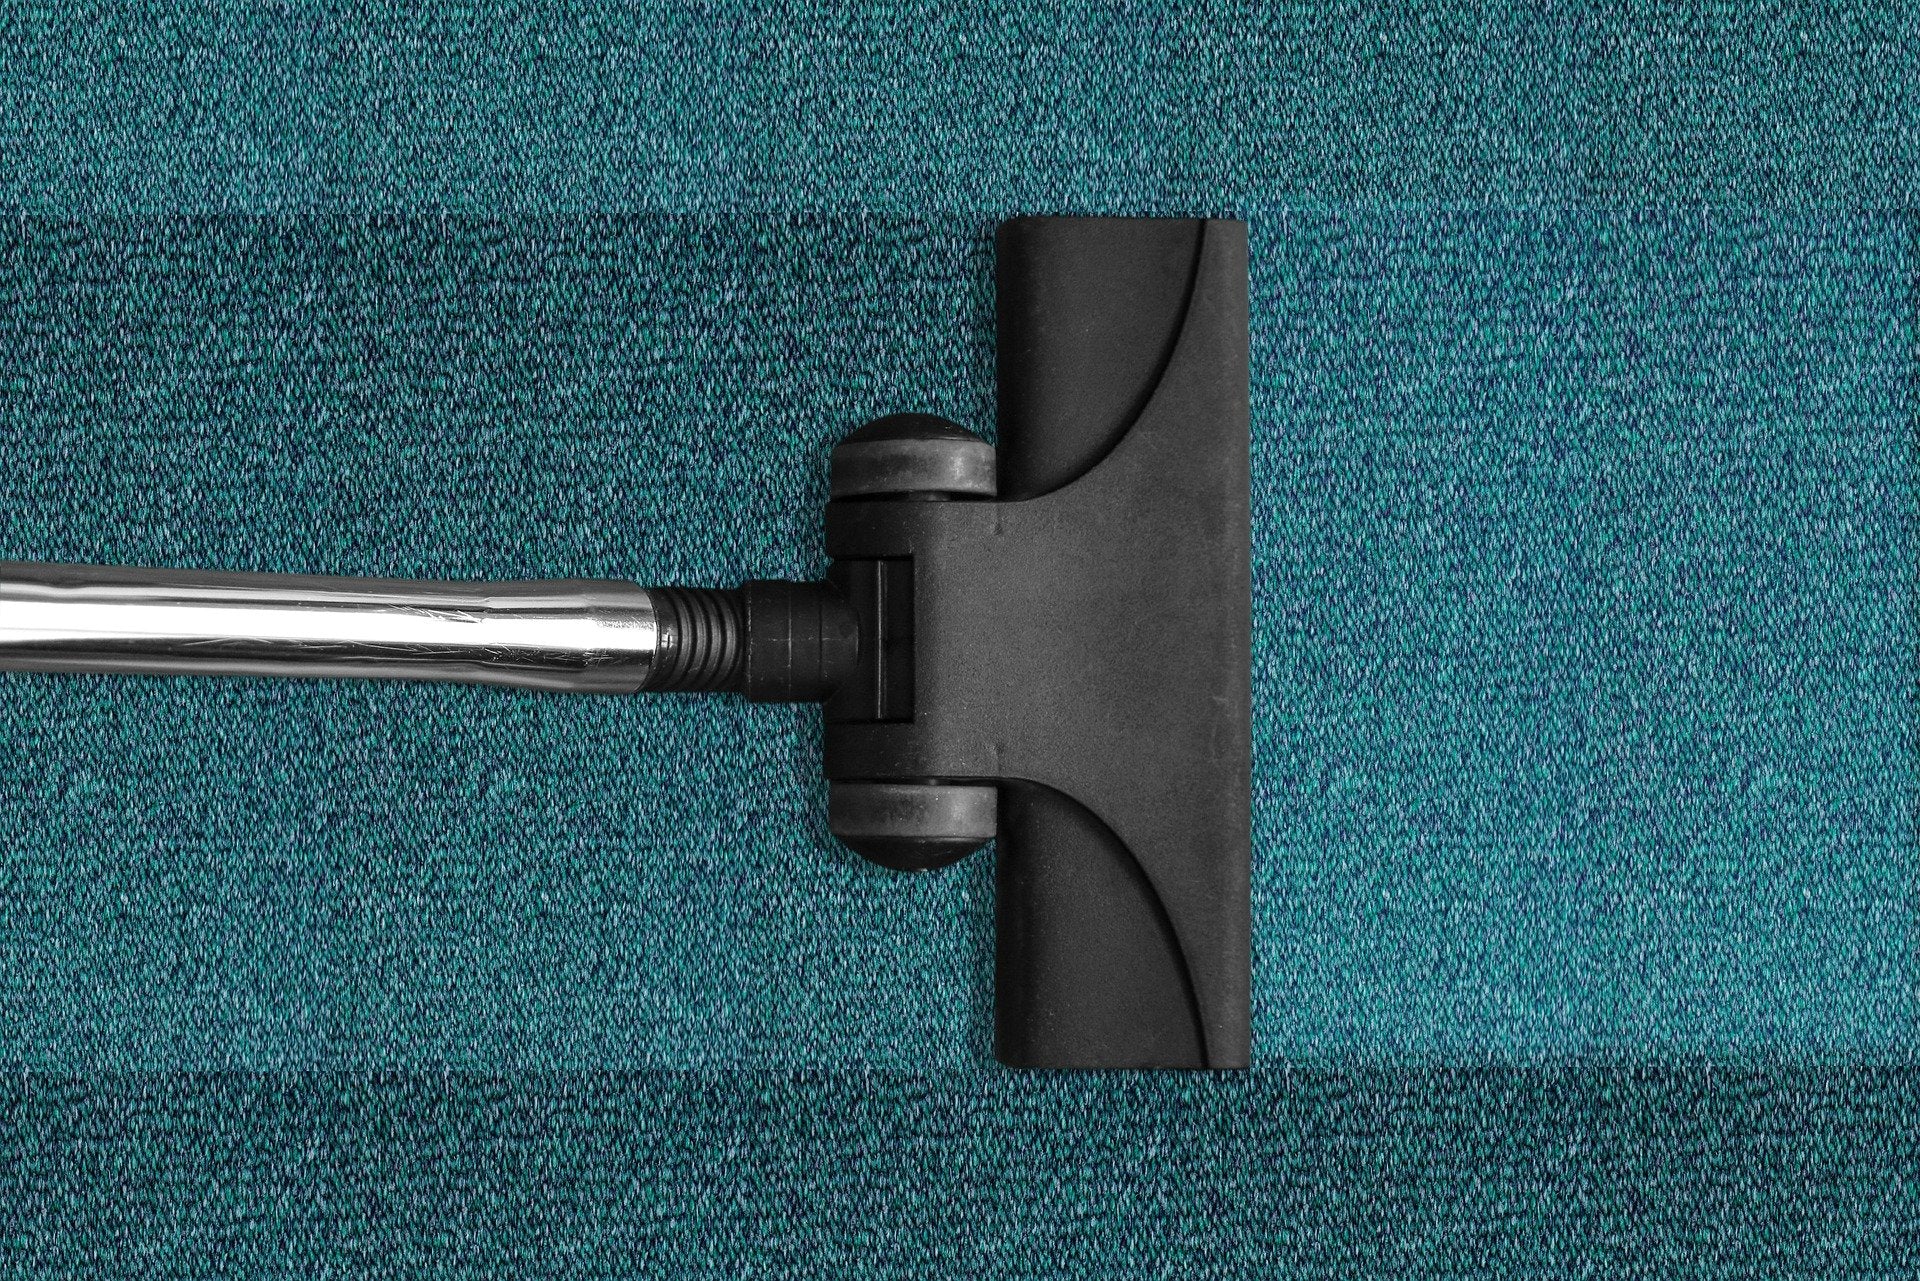 Vacuum cleaning a dirty blue carpet 